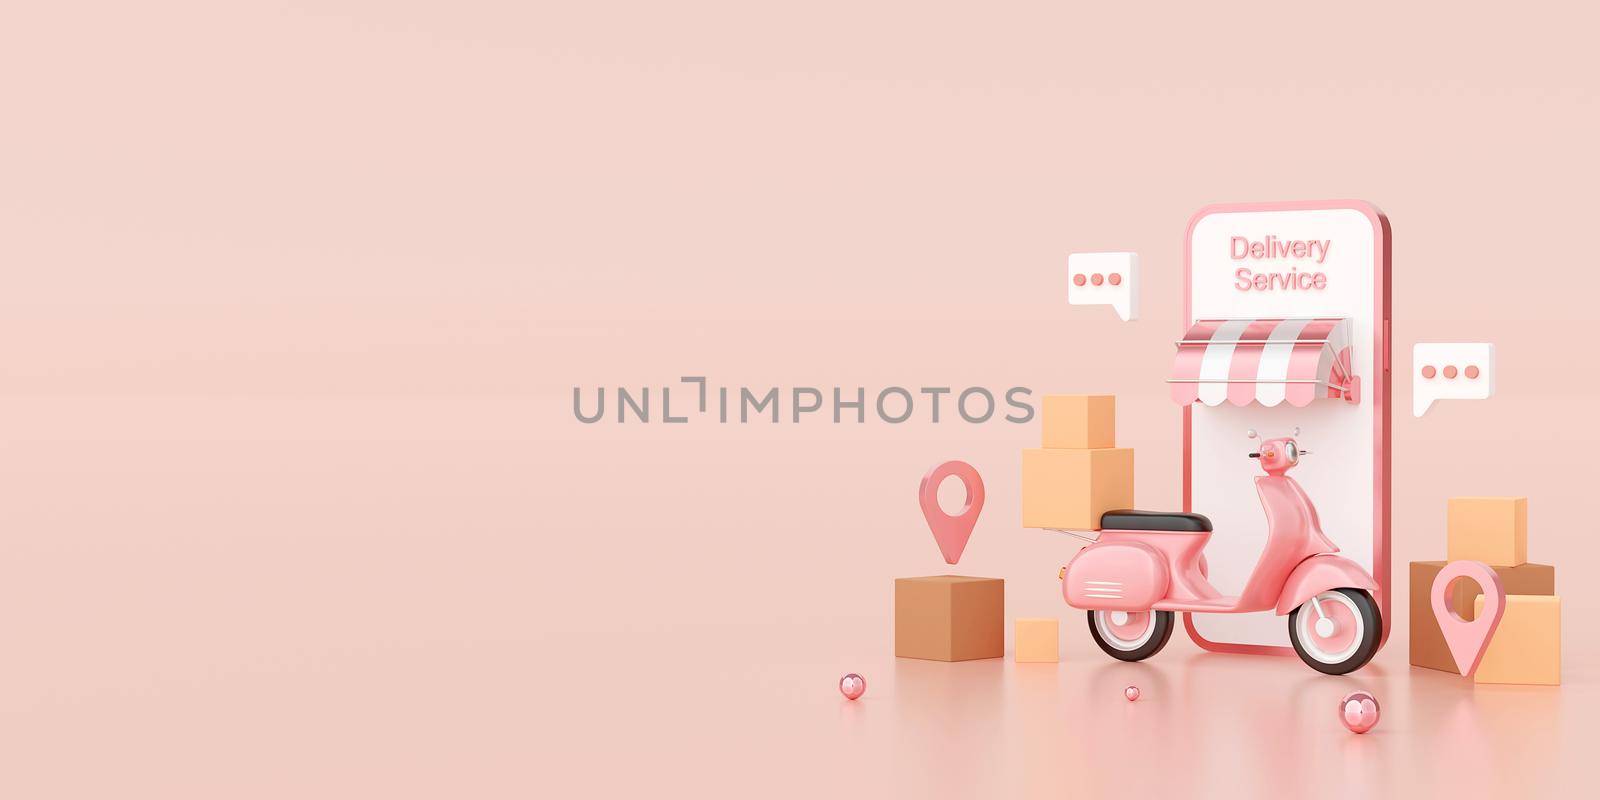 Delivery service on mobile application, Transportation or food delivery by scooter, 3d illustration by nutzchotwarut